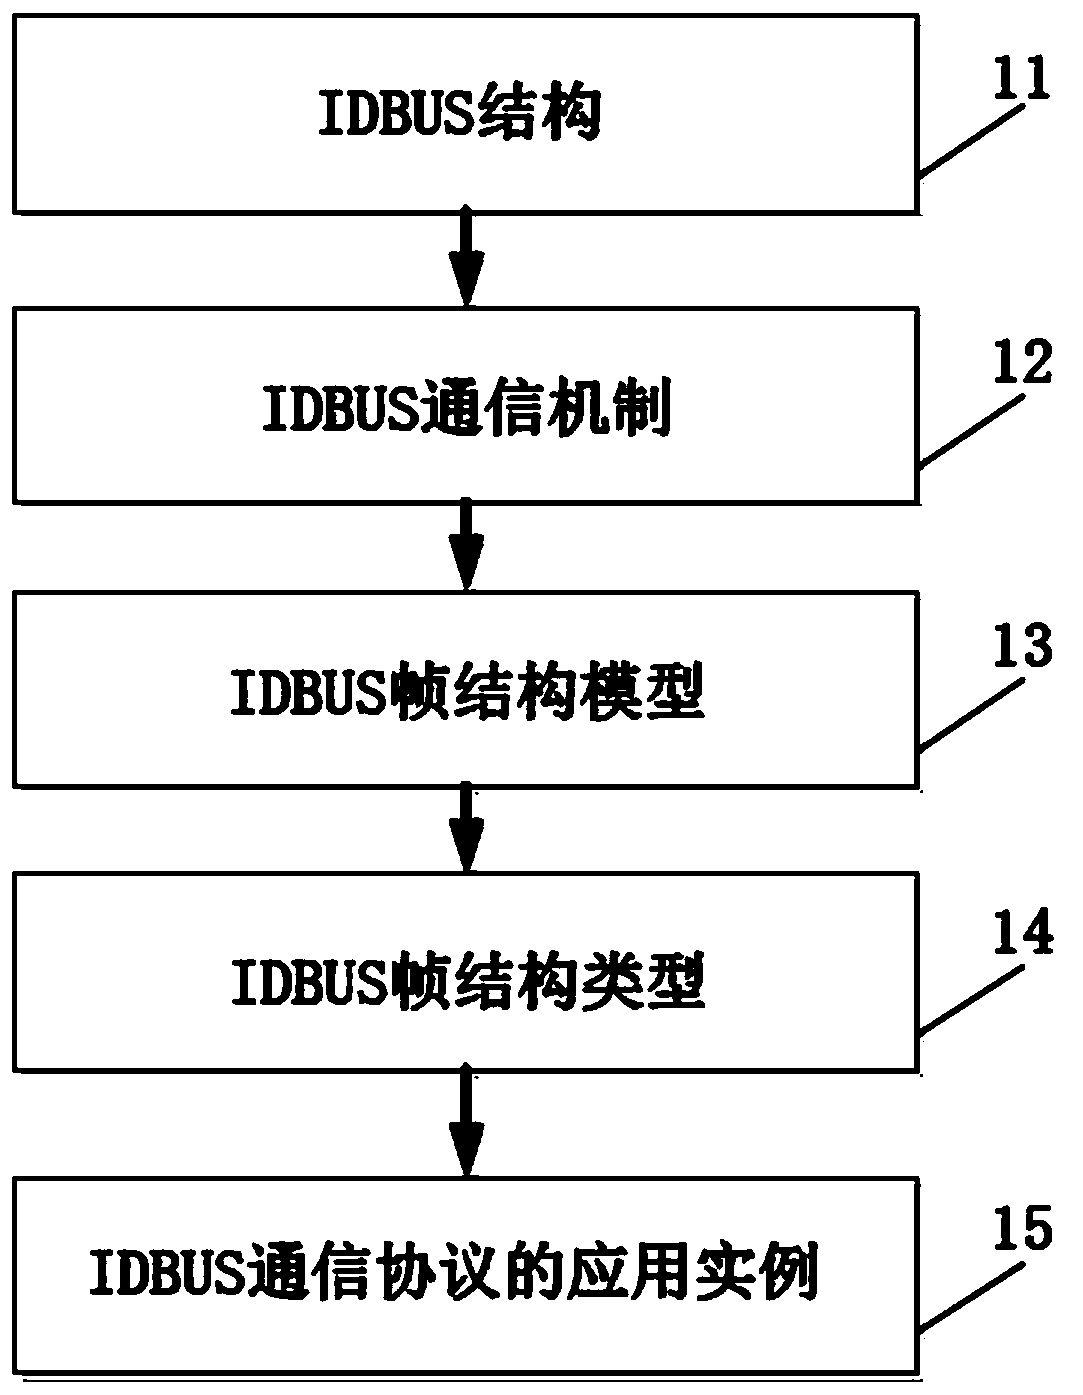 Communication protocol and an application of ignition drive bus IDBUS